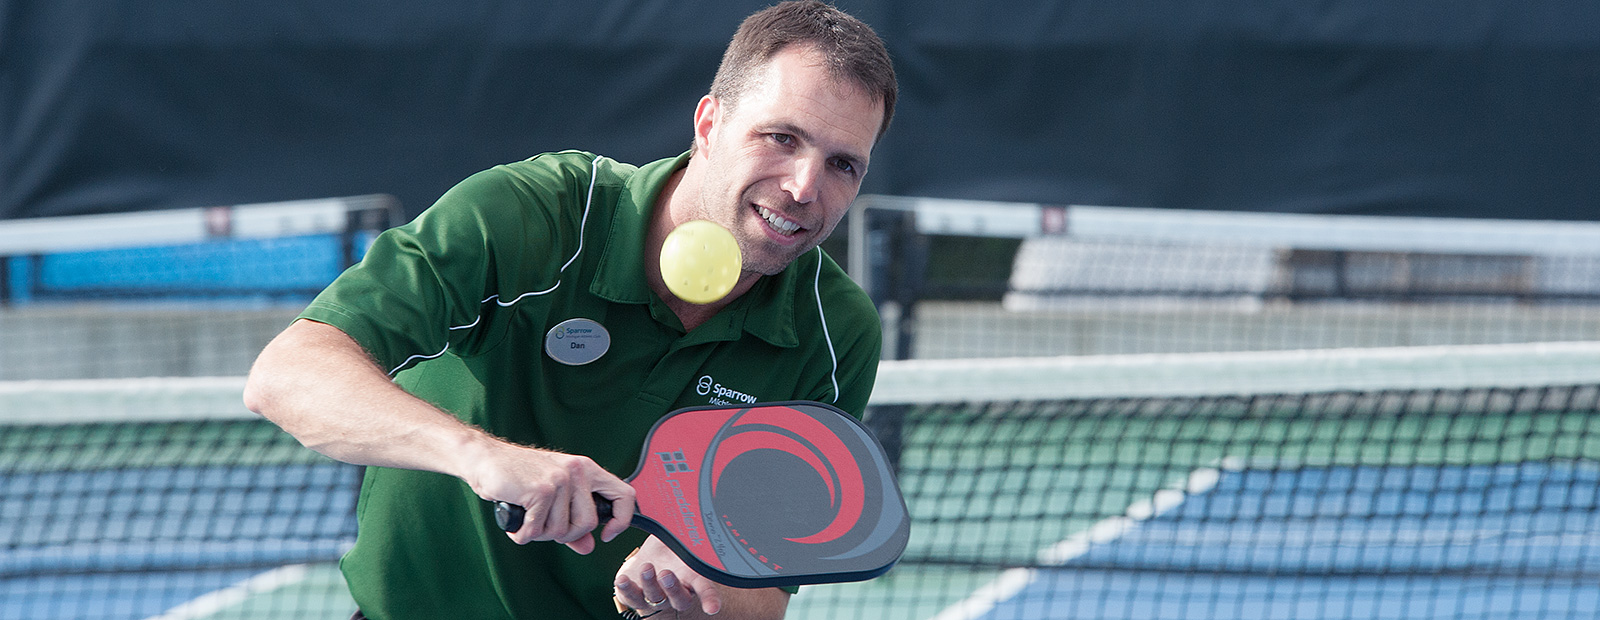 Daniel Howard playing Pickle Ball at he MAC - Photo Dave Trumpie